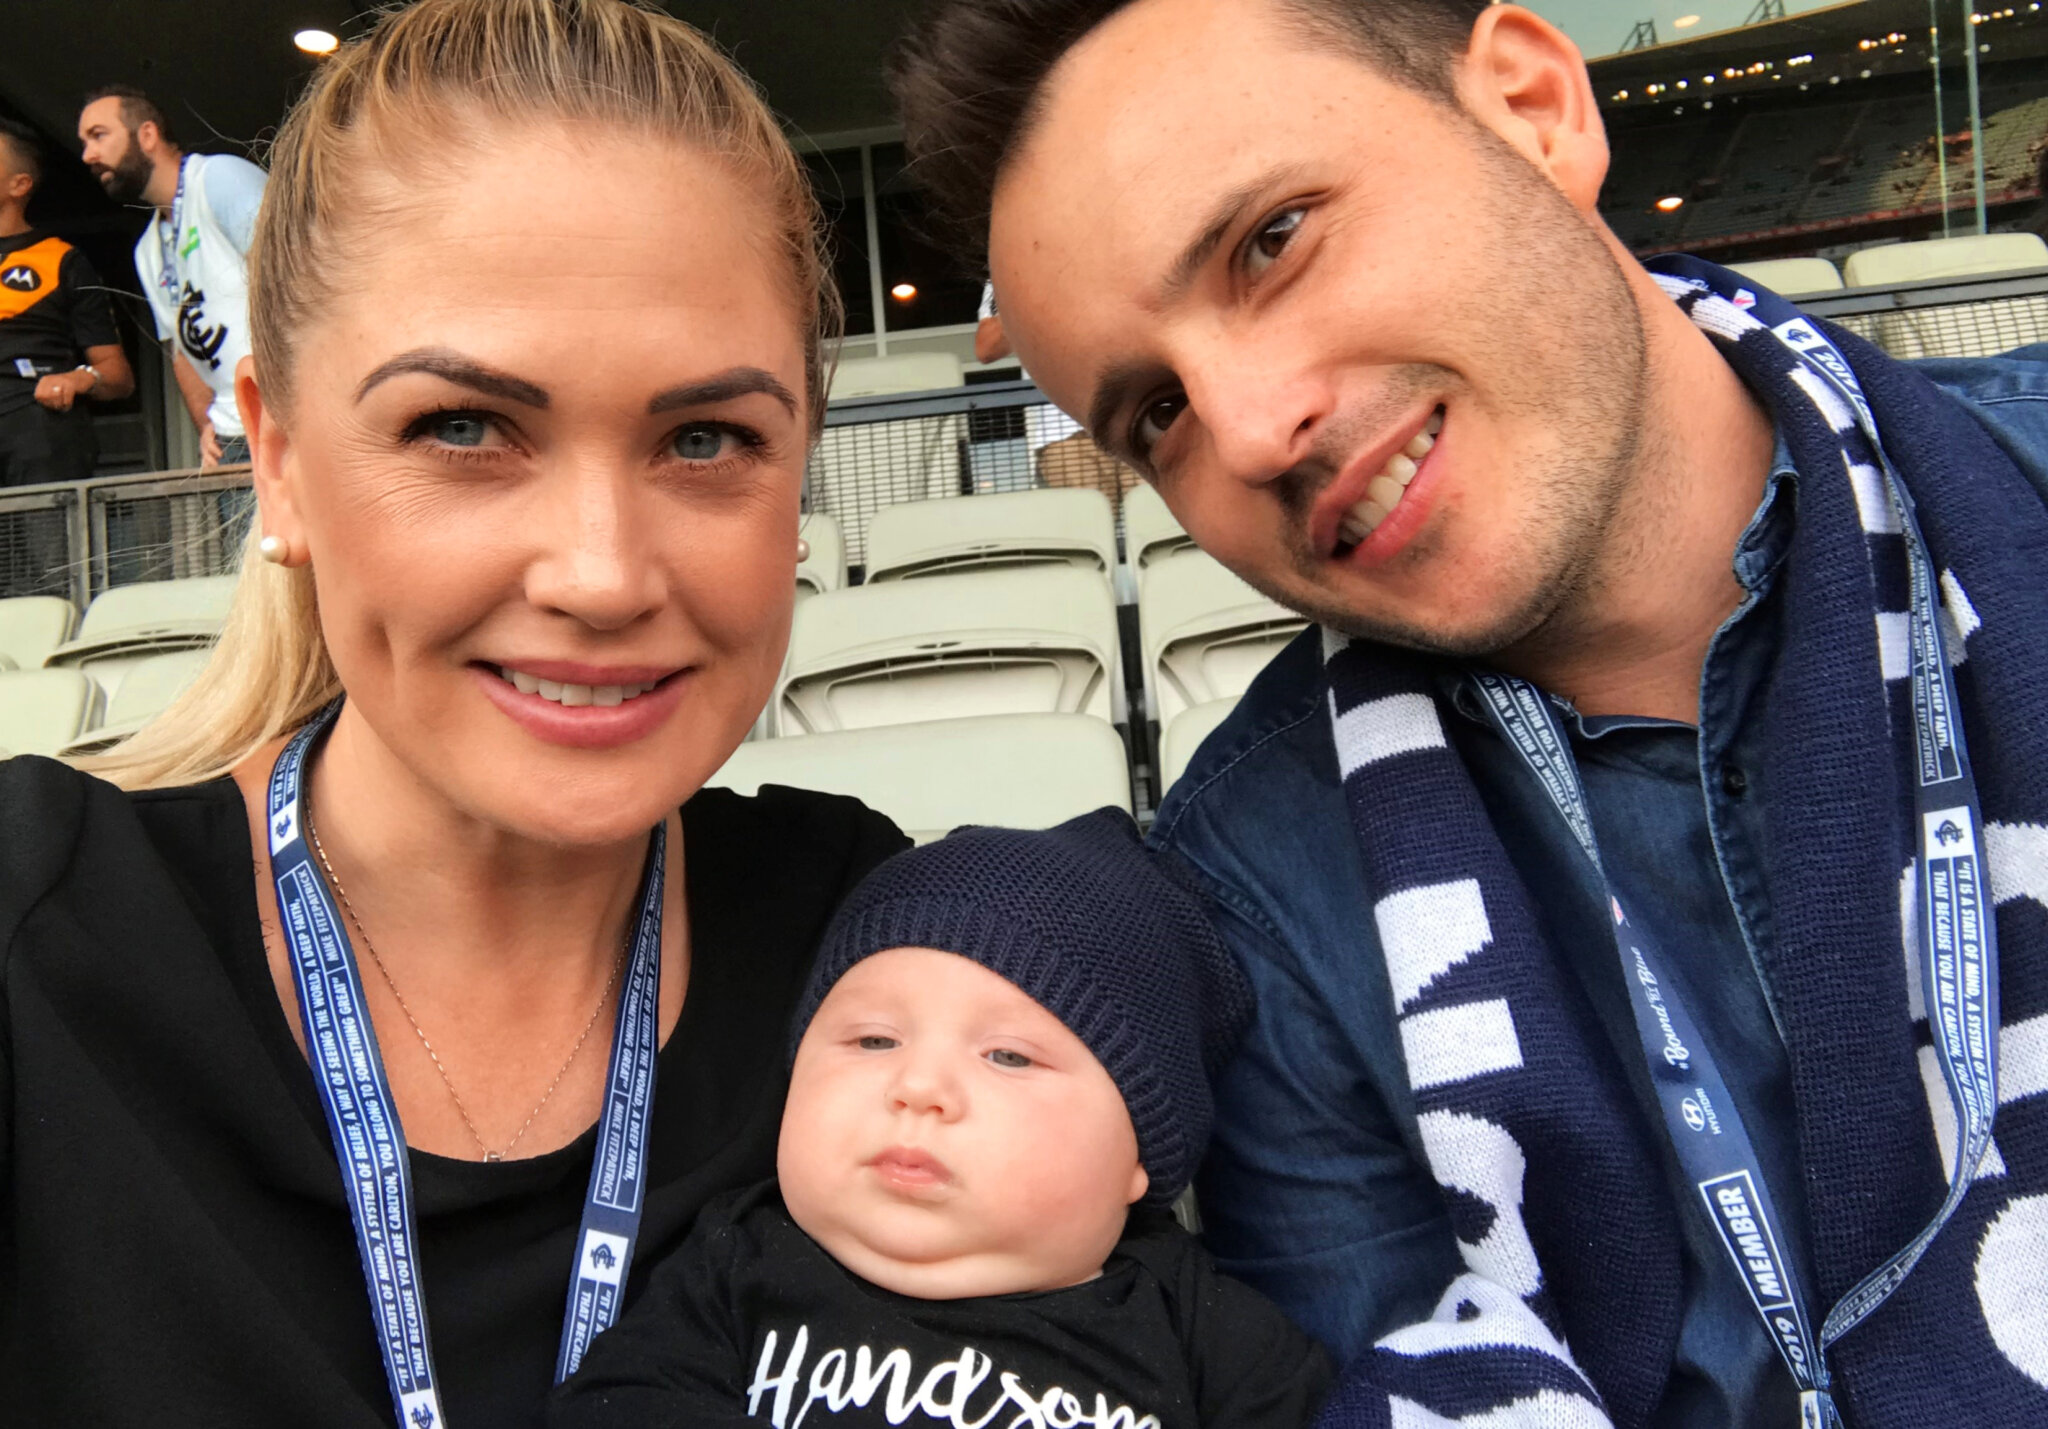 Mark, his wife, and 6-month-old son watching his beloved Carlton Football Club at the Melbourne Cricket Ground